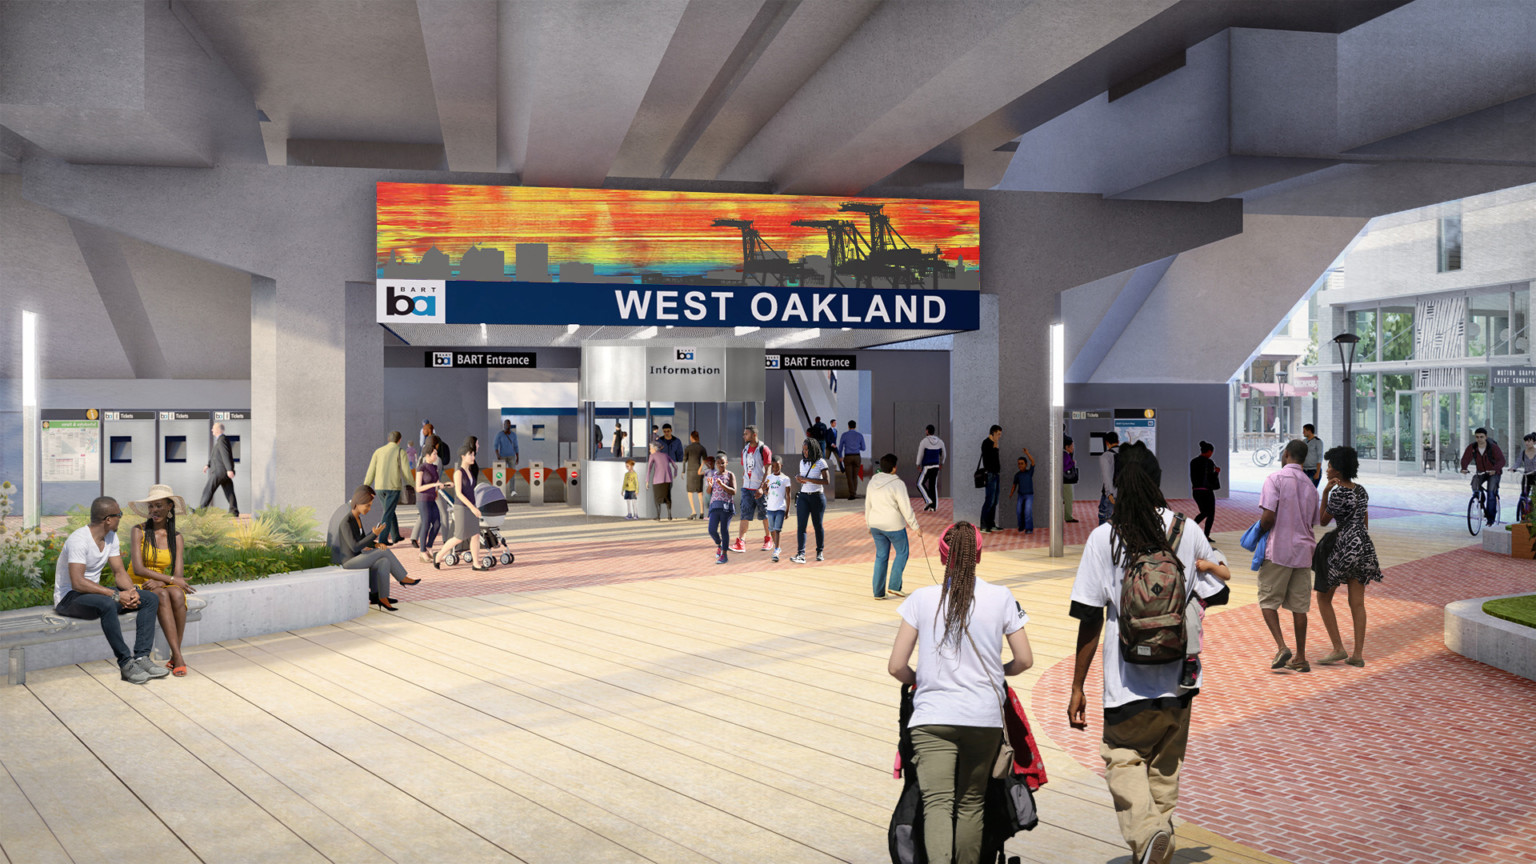 Rendering of covered street level entrance to rail station with mural reading West Oakland. Beyond, stairs lead up to station